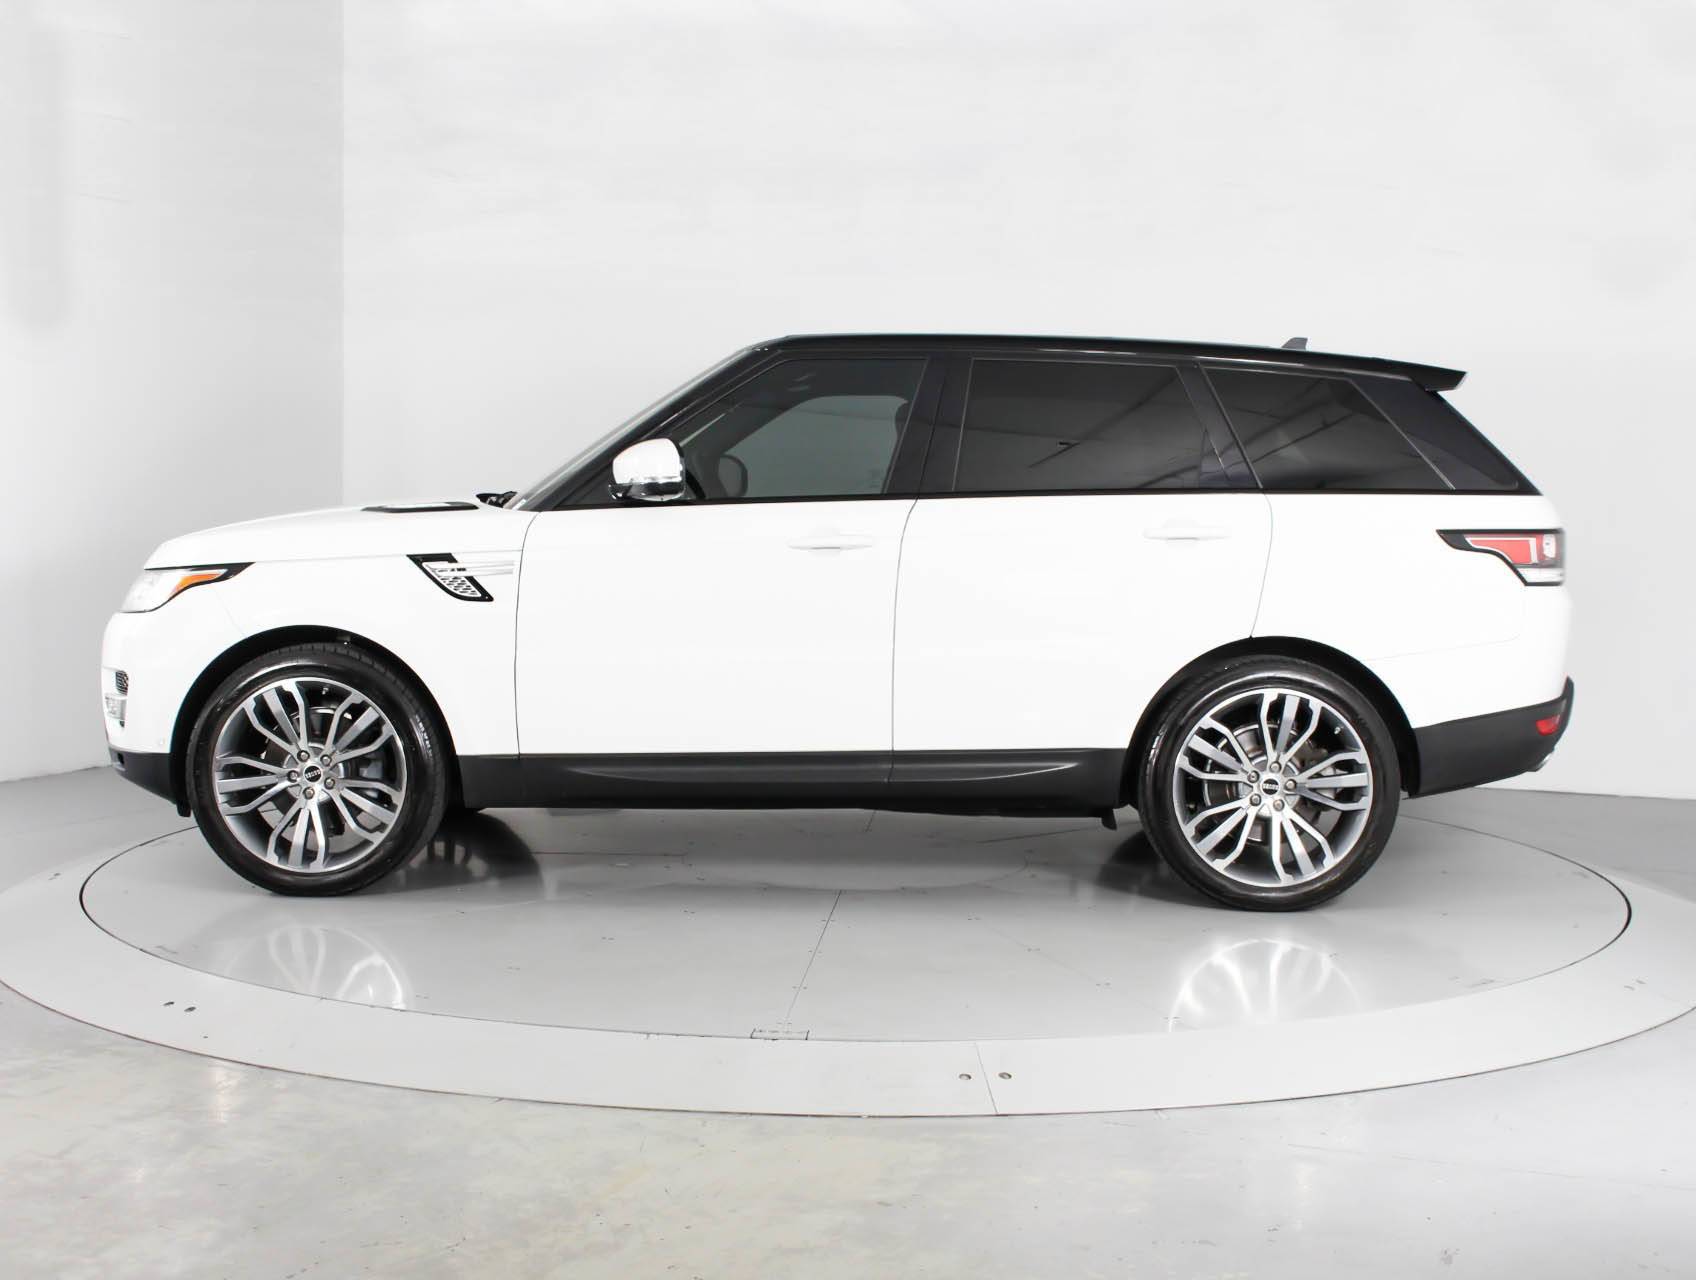 Florida Fine Cars - Used LAND ROVER RANGE ROVER SPORT 2016 WEST PALM Hse Supercharged